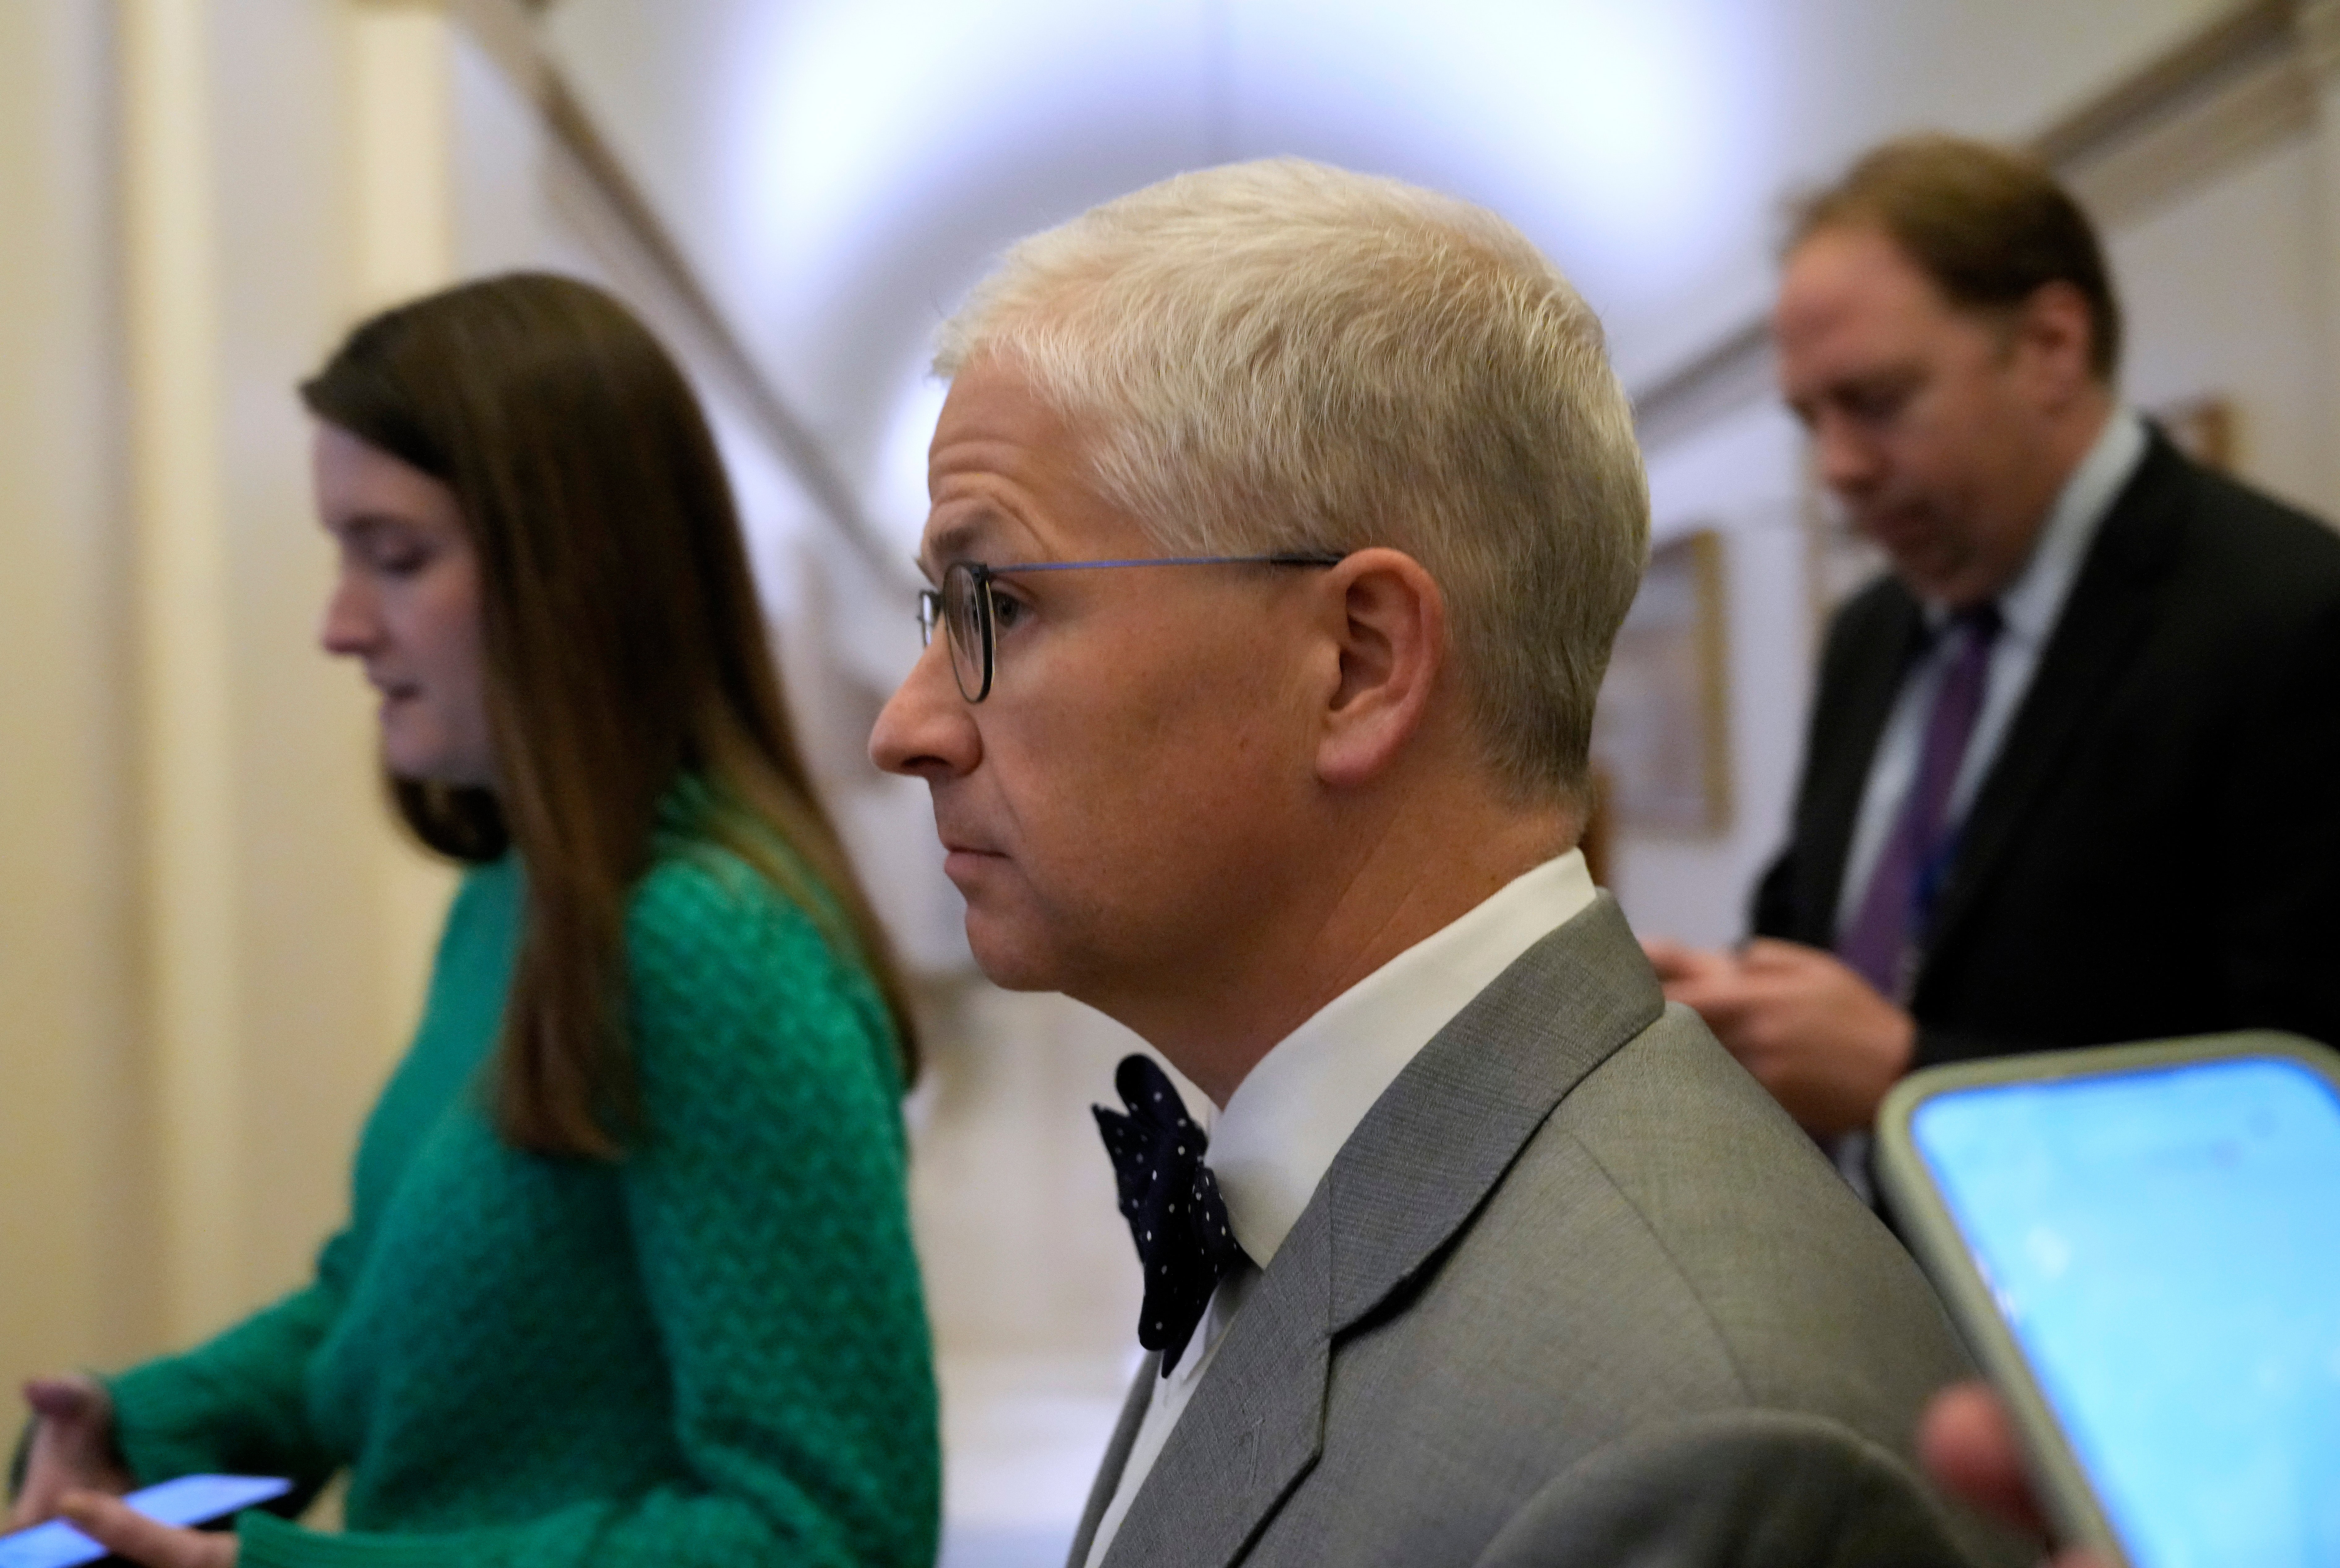 US Rep Patrick McHenry, who serves as speaker pro tempore, walks through the halls at the US Capitol on 19 October 2023 in Washington